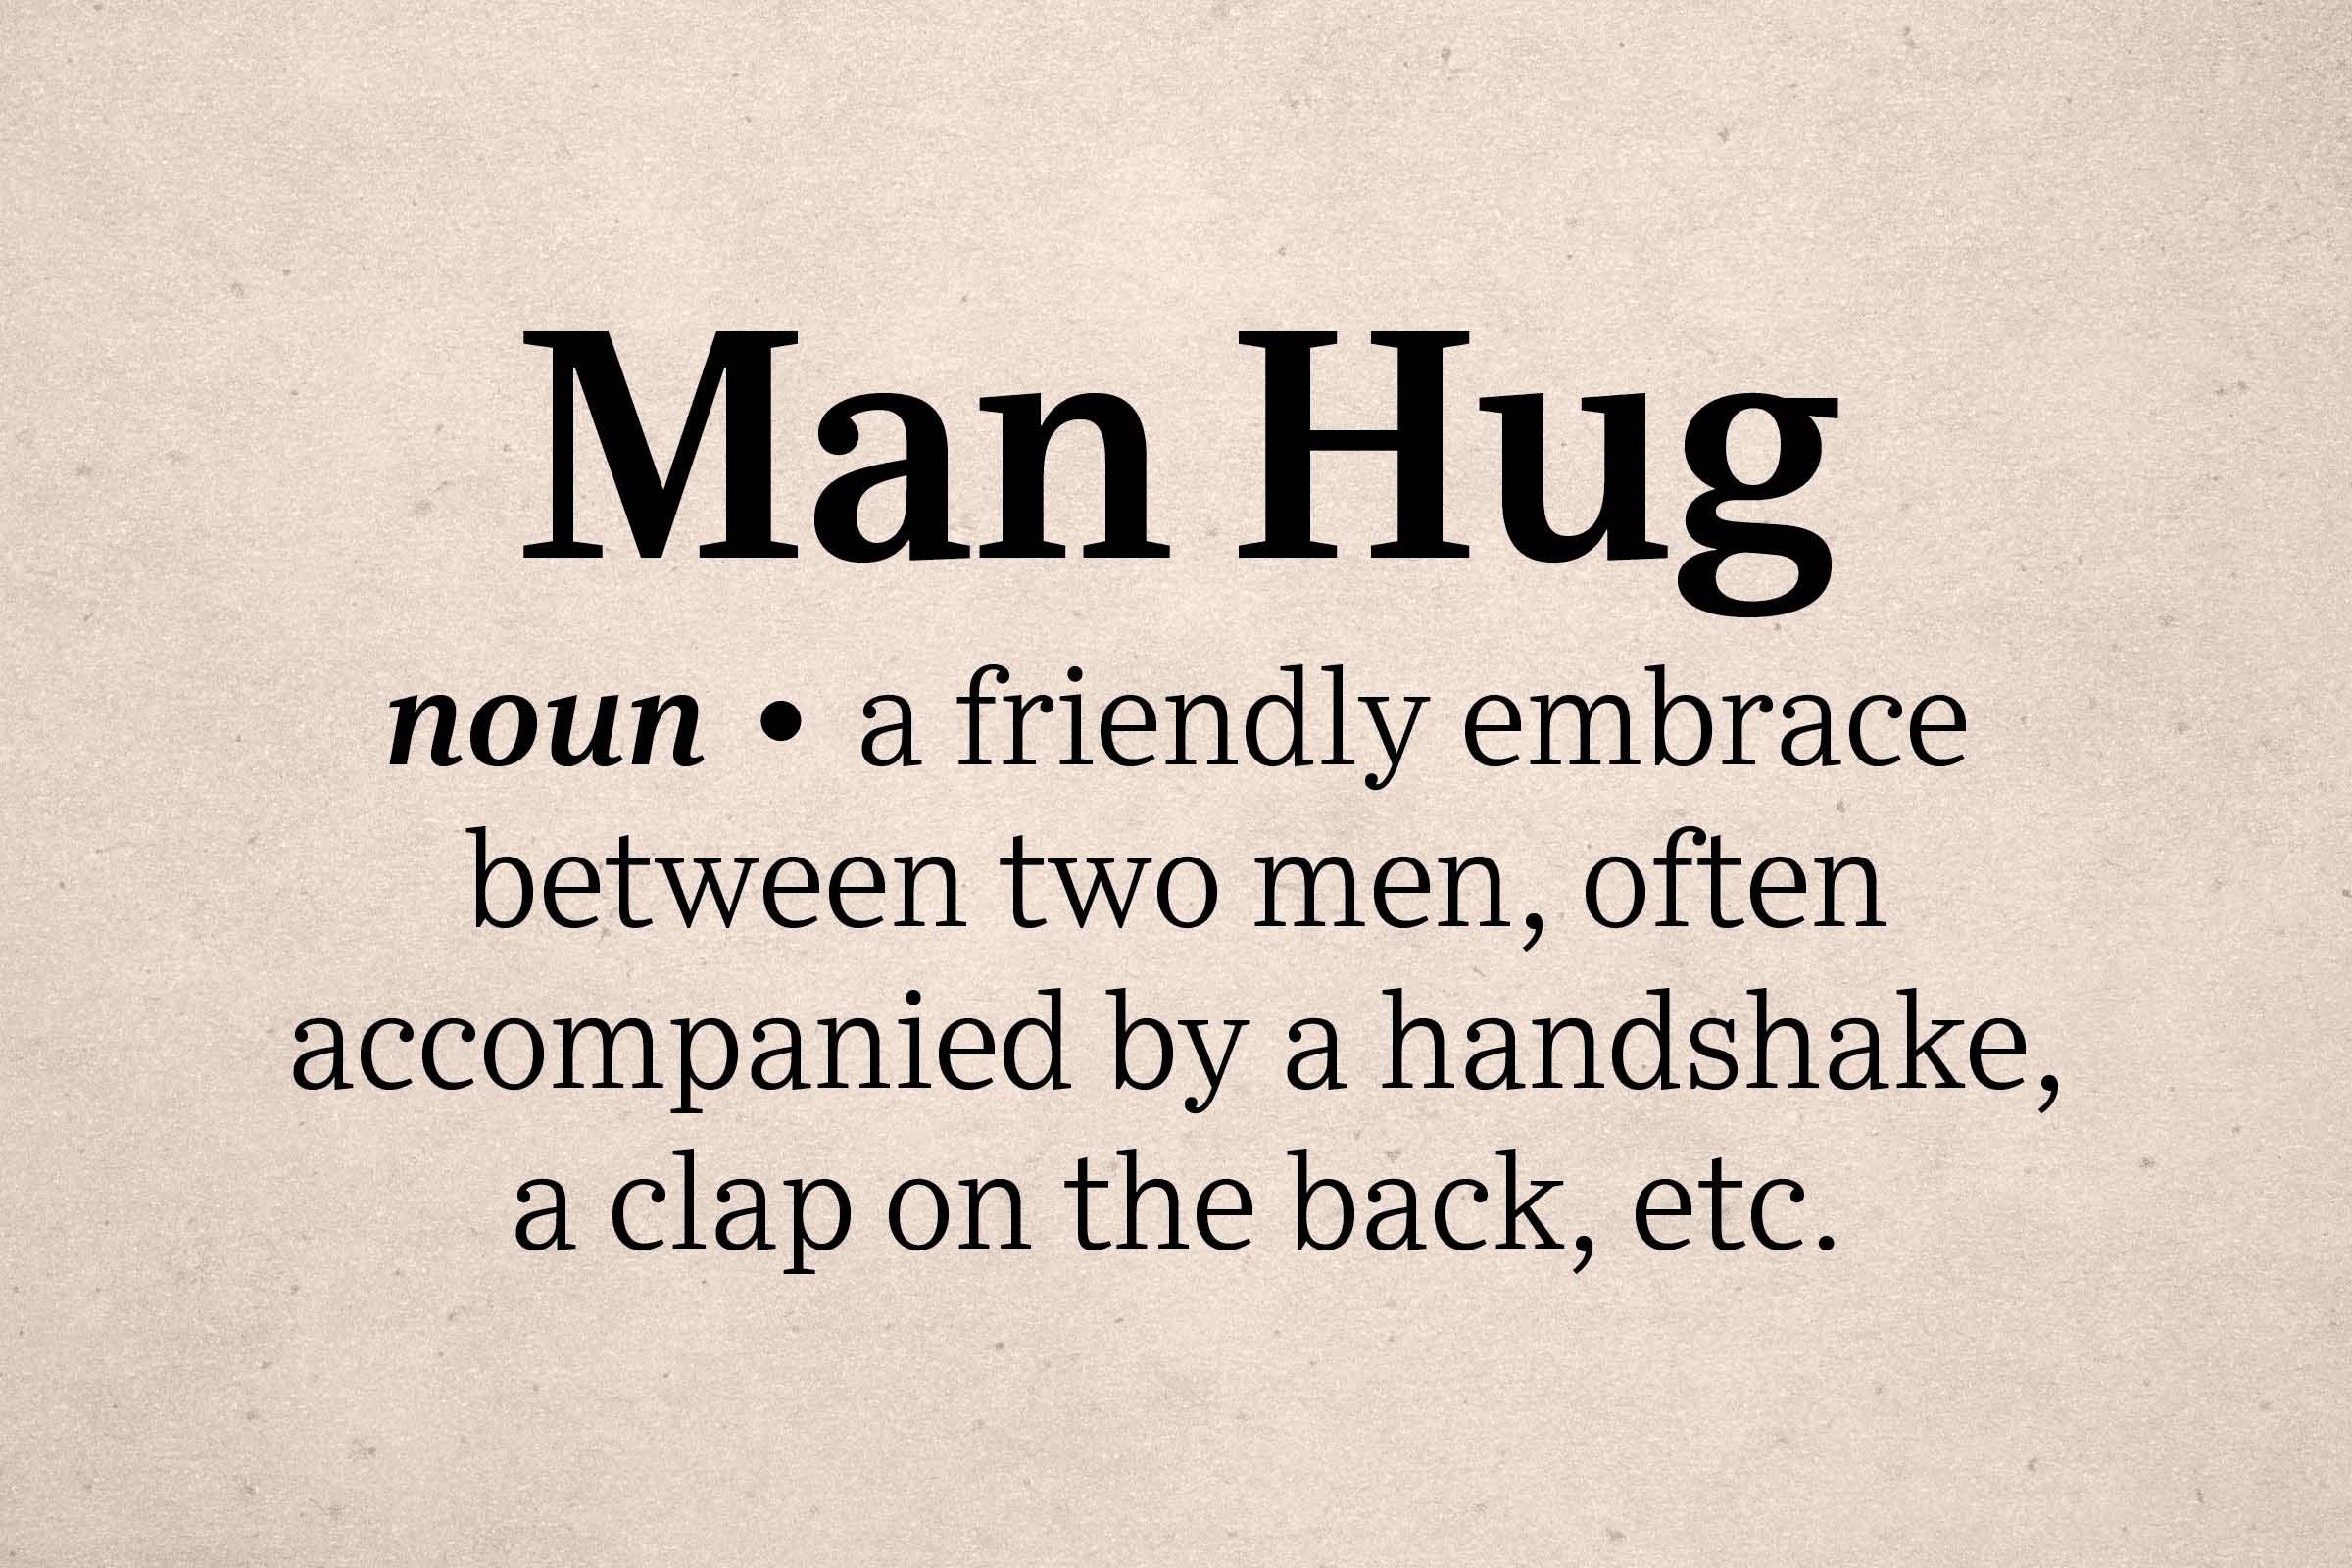 12 Funniest New Words Added to the Dictionary in 2020 - Man Hug